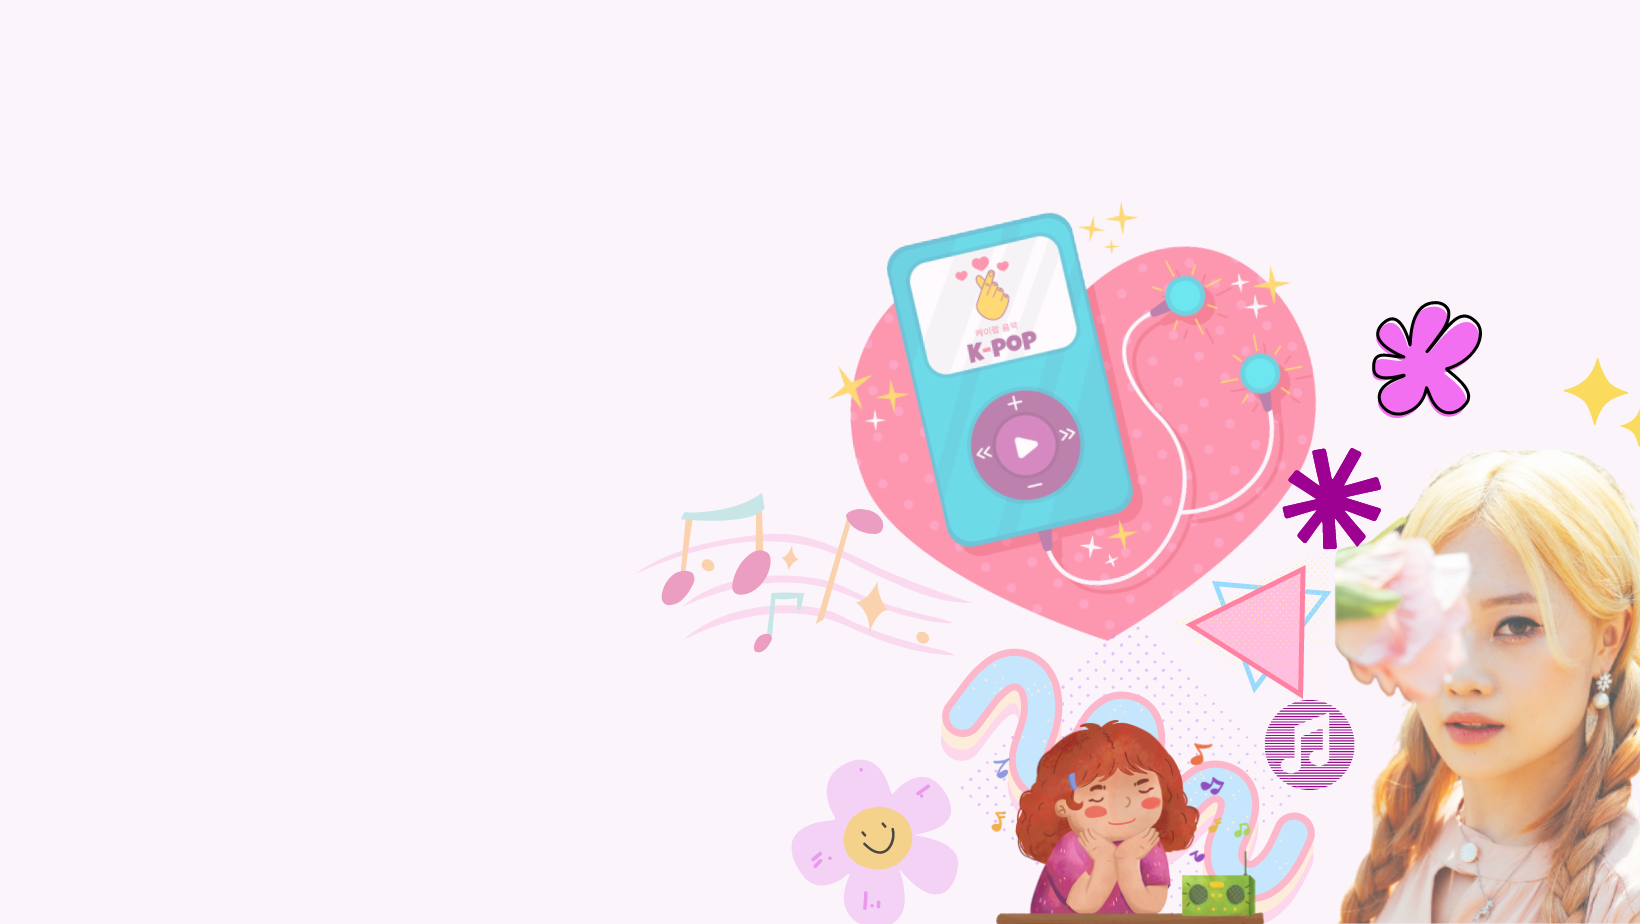 a funky design about kpop. designed in a pink funcky background with flowers, music icon and korean pop idol's picture.